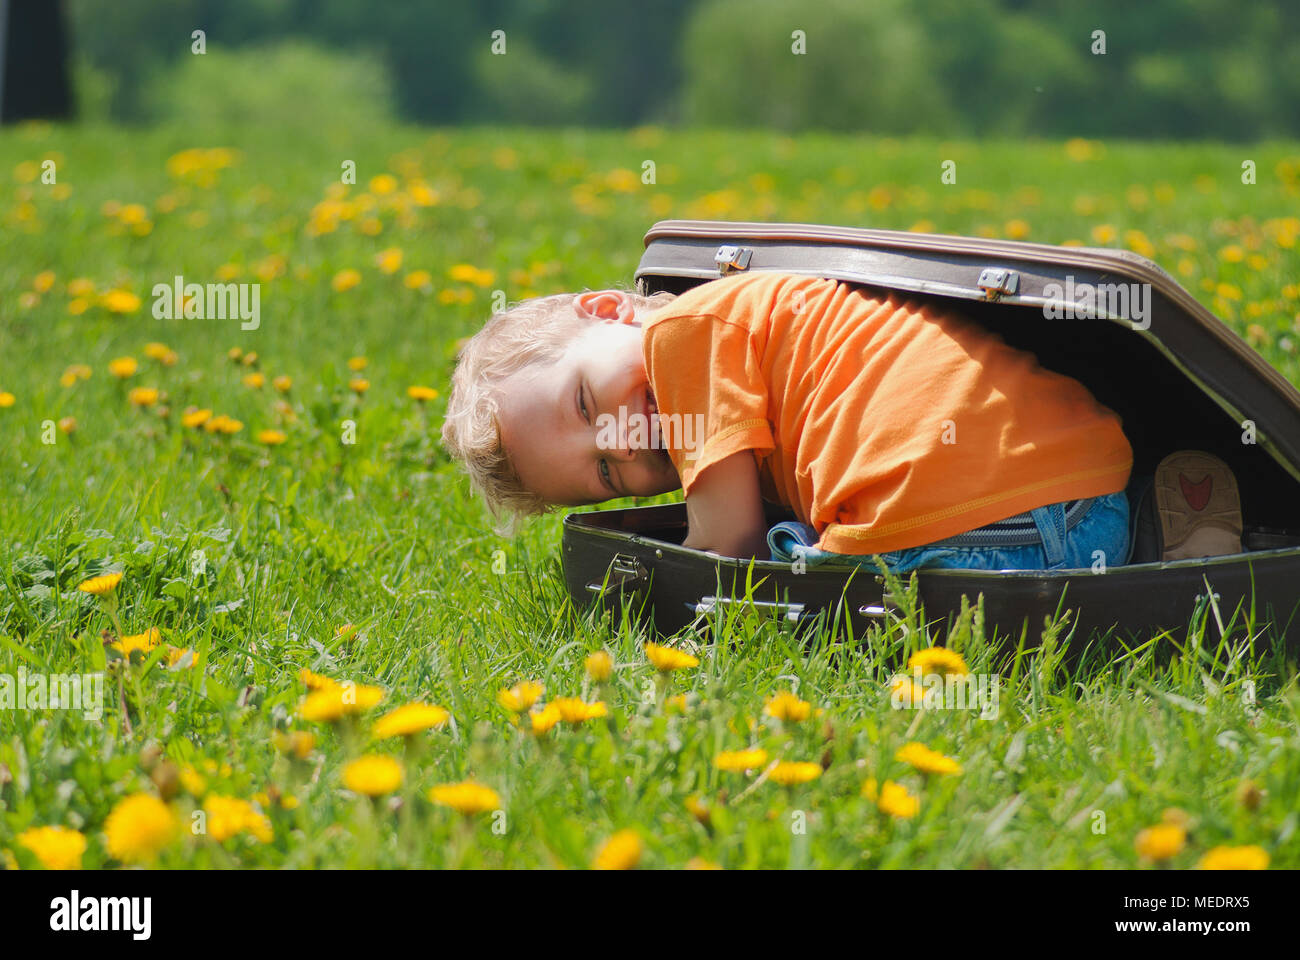 Cute little funny child trying to hide inside of vintage brown suitcase. Boy laughs and smiles happily while playing outdoors on green grass lawn full Stock Photo